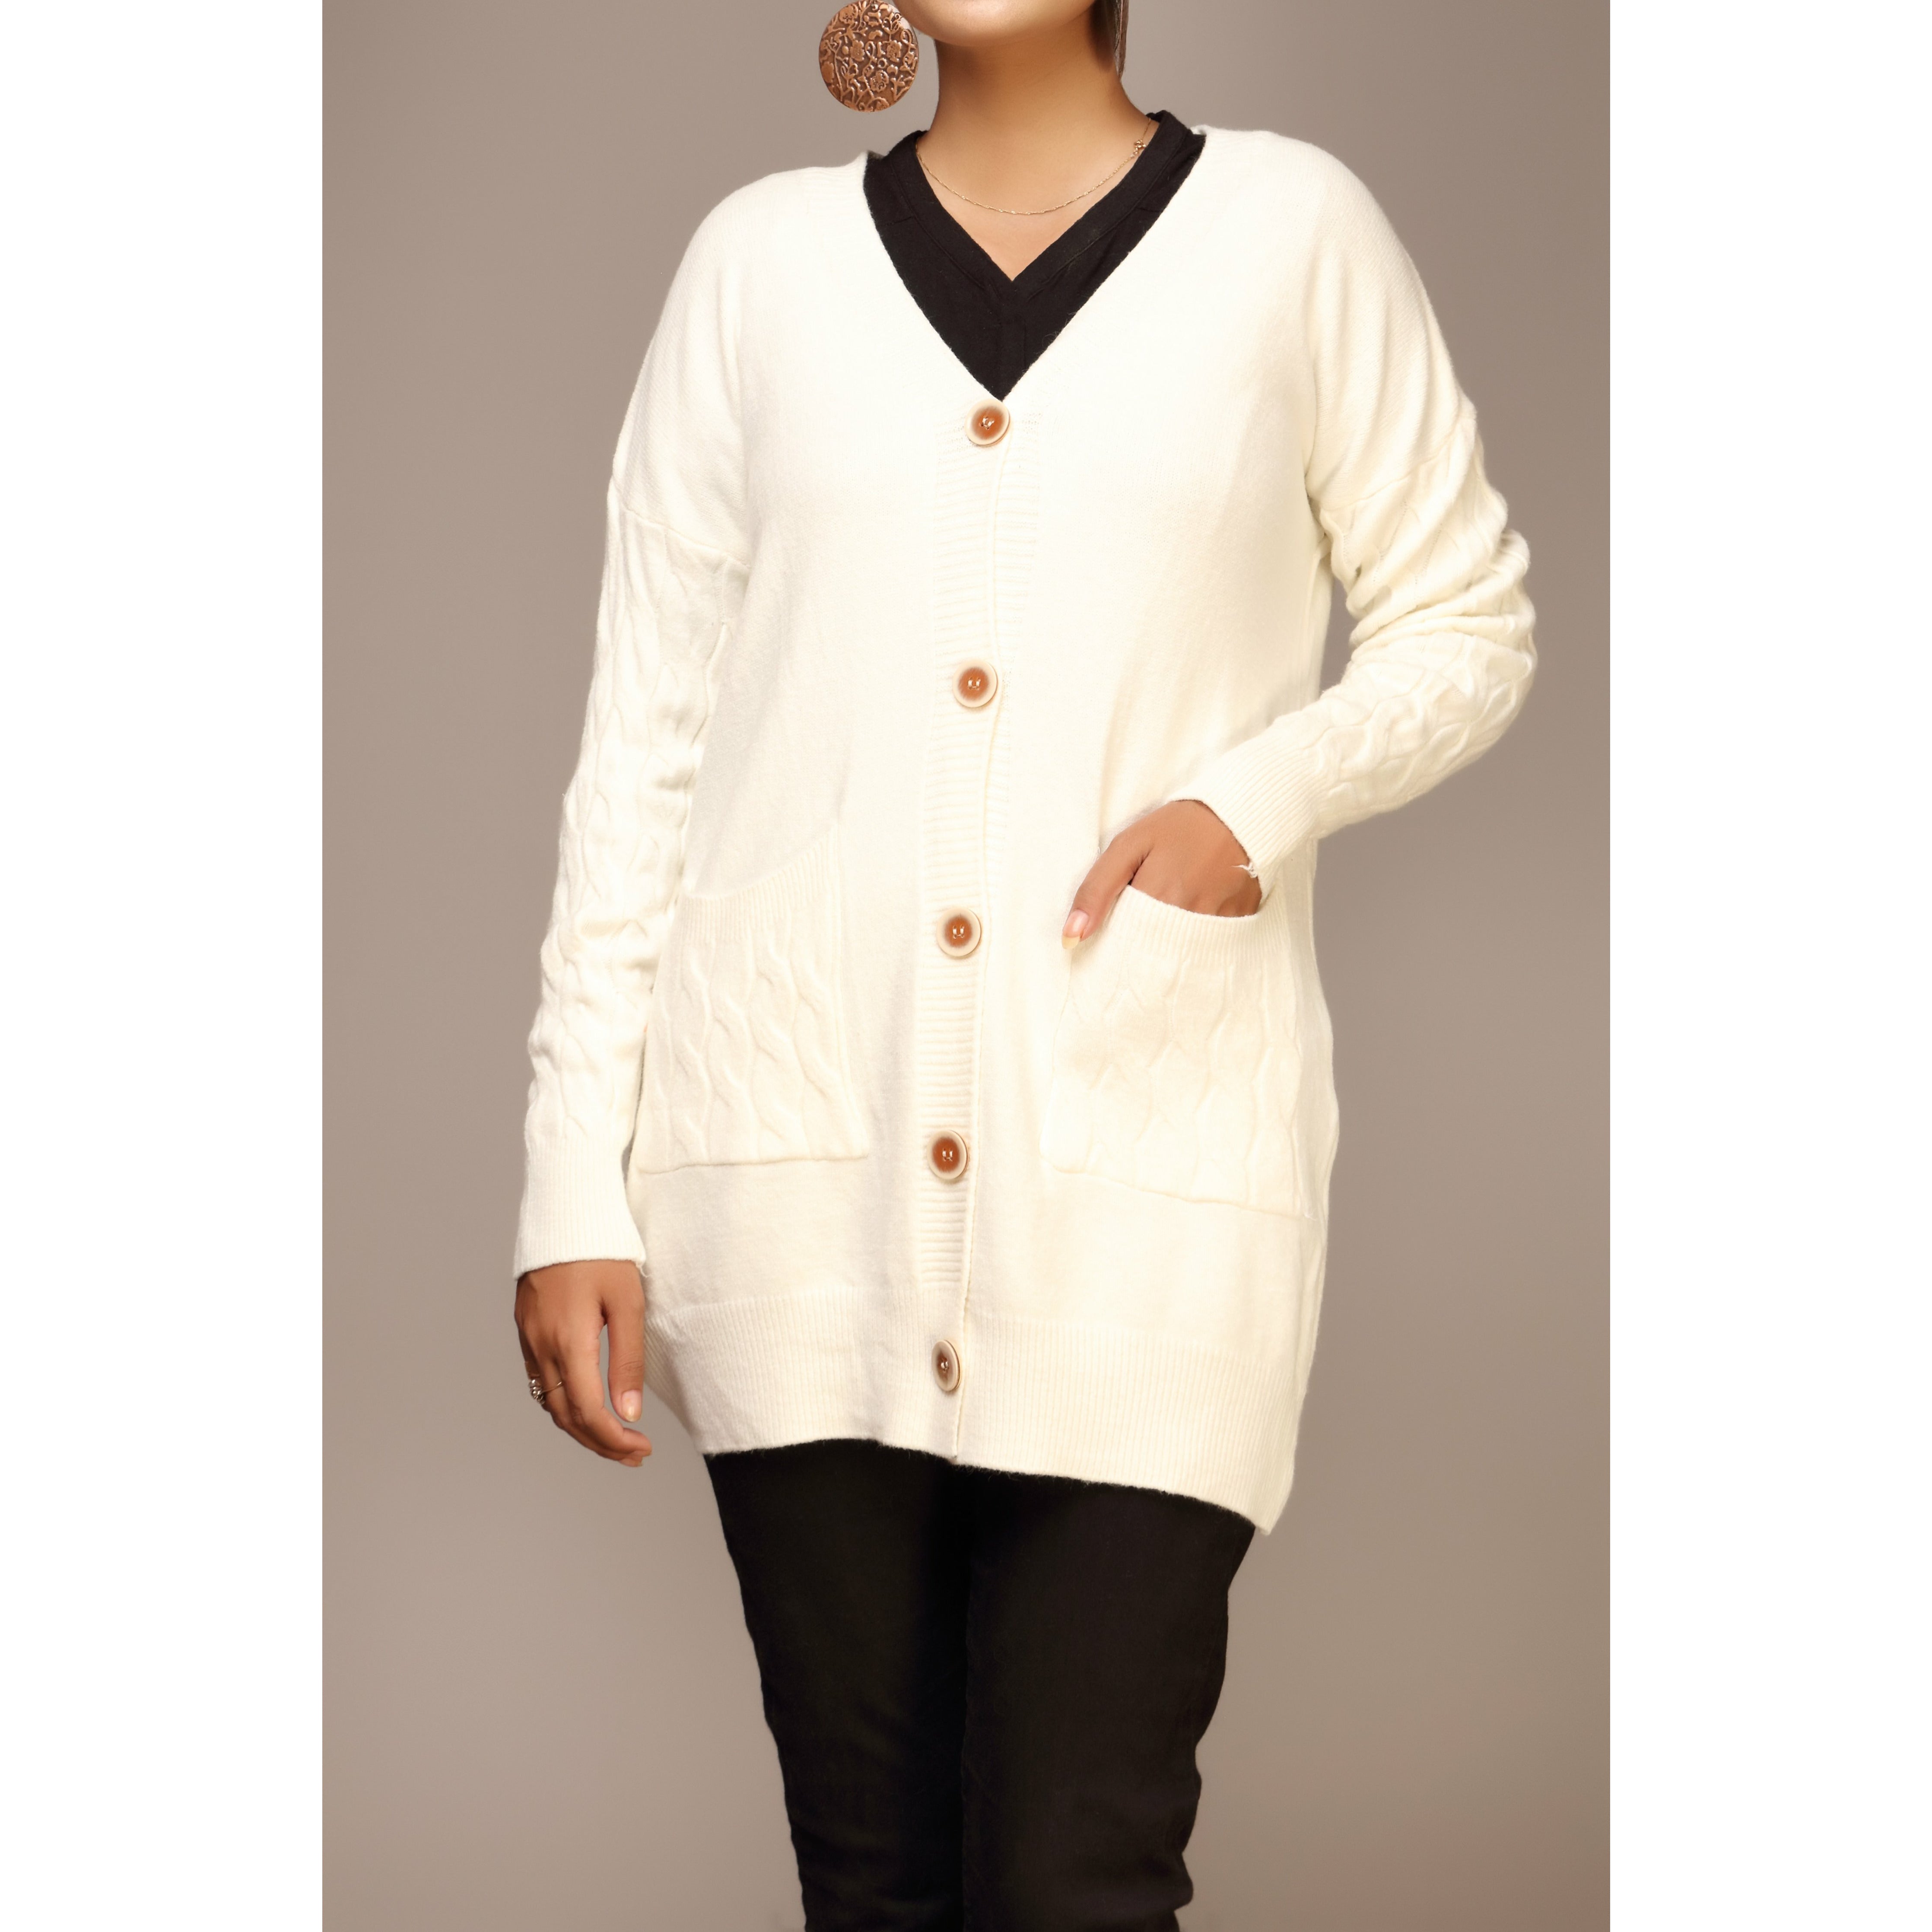 White Color Long Cardigan PW1900